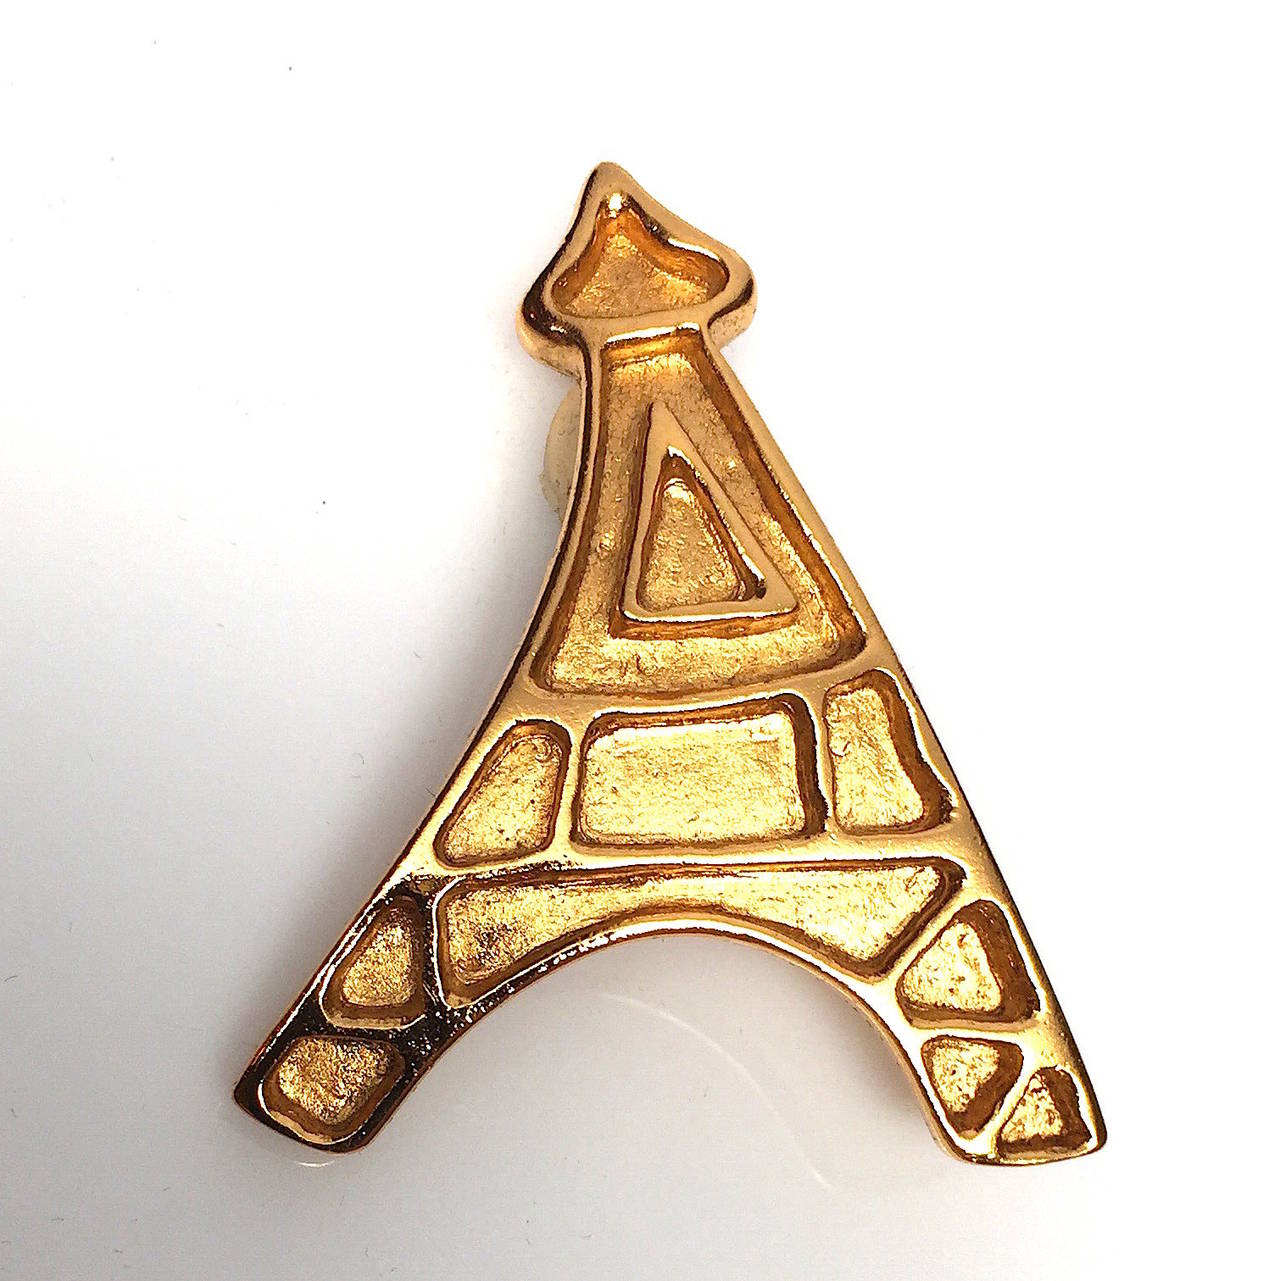 Art deco Yves Saint Laurent YSL gold-tone Eiffel Tower clip on earrings, circa mid-1980s. These were purchased in Paris at 